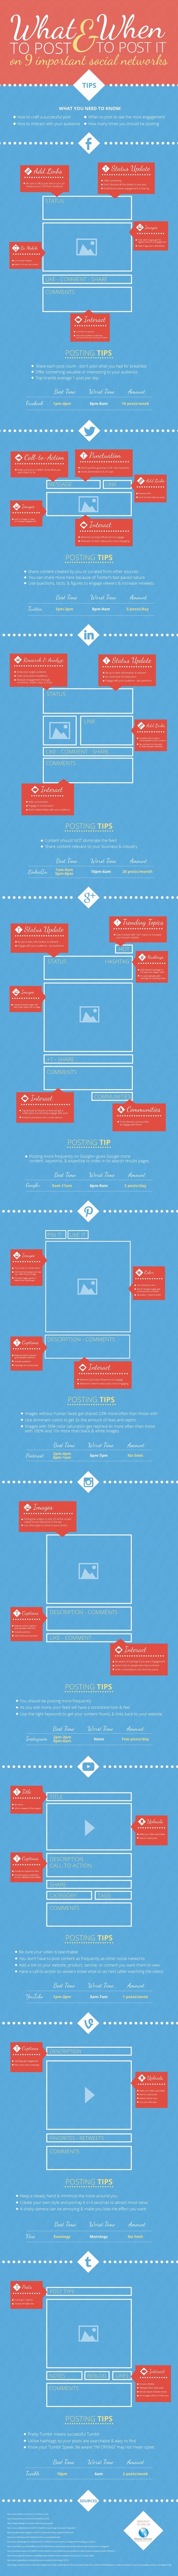 What, When and Where to Post on Social Media [INFOGRAPHIC] | Time to Learn | Scoop.it